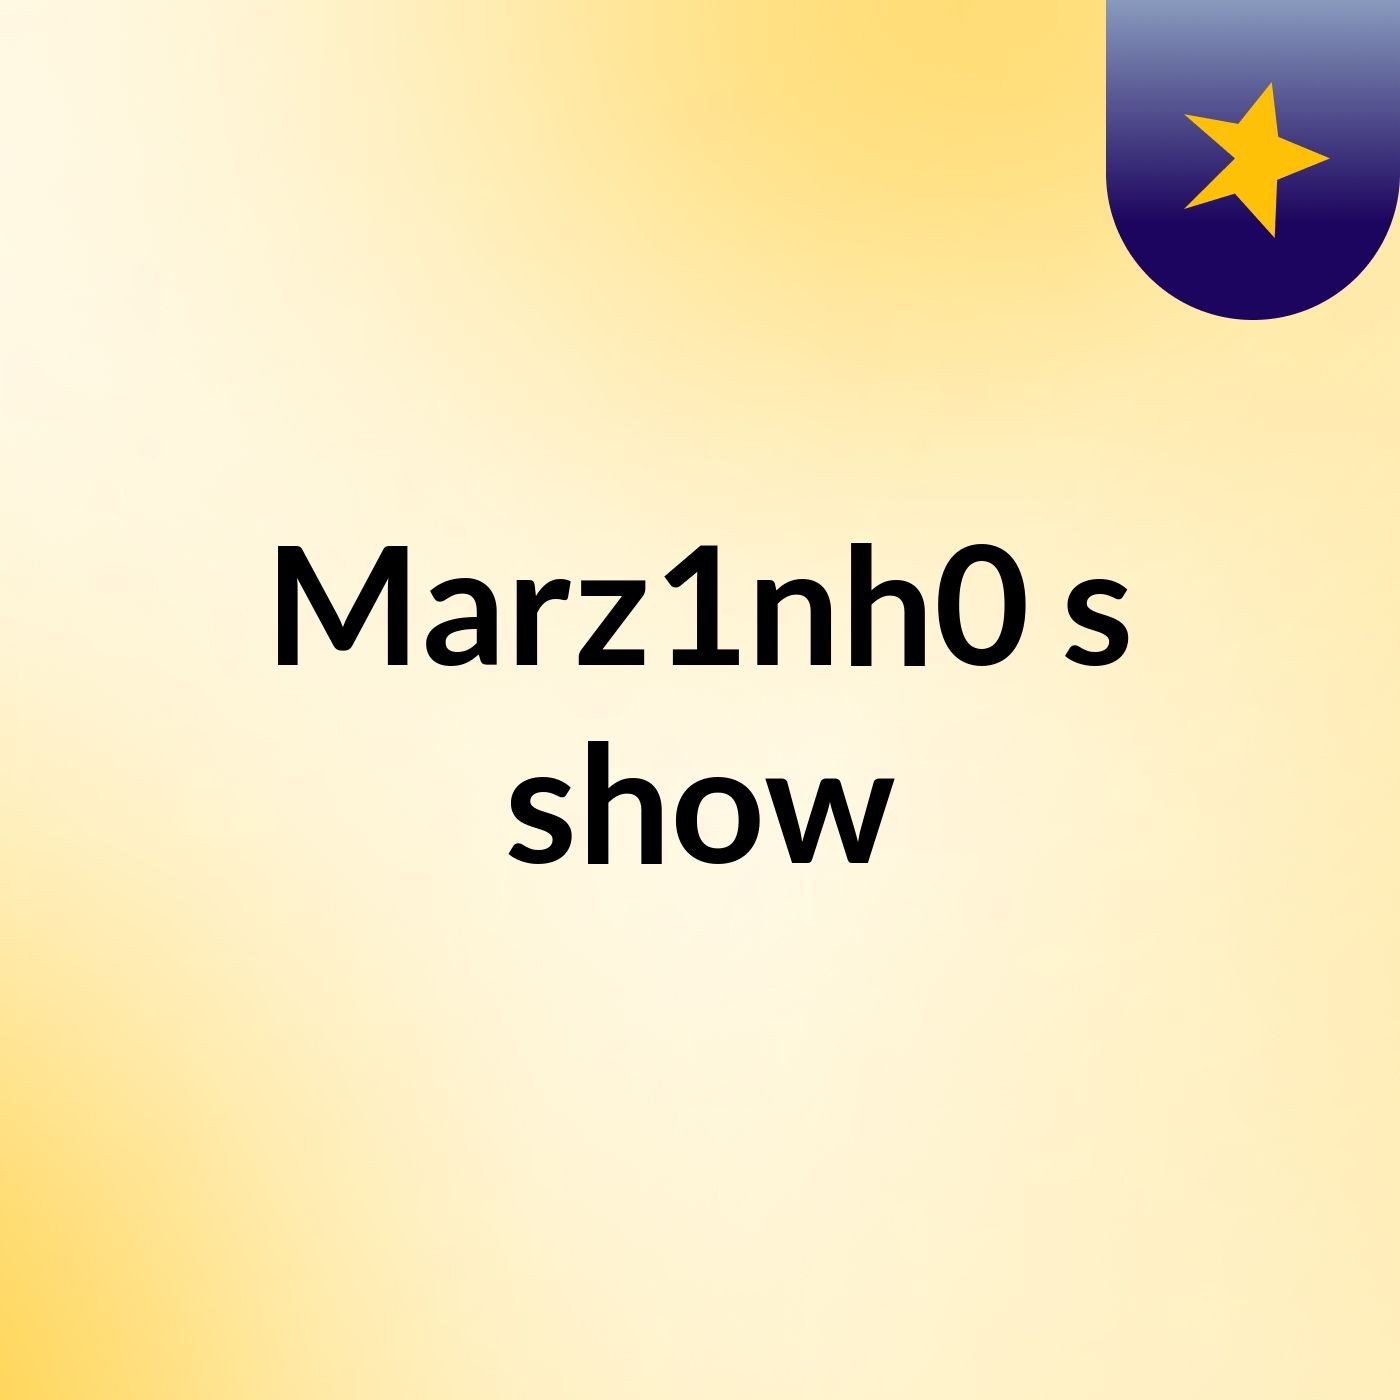 Marz1nh0's show